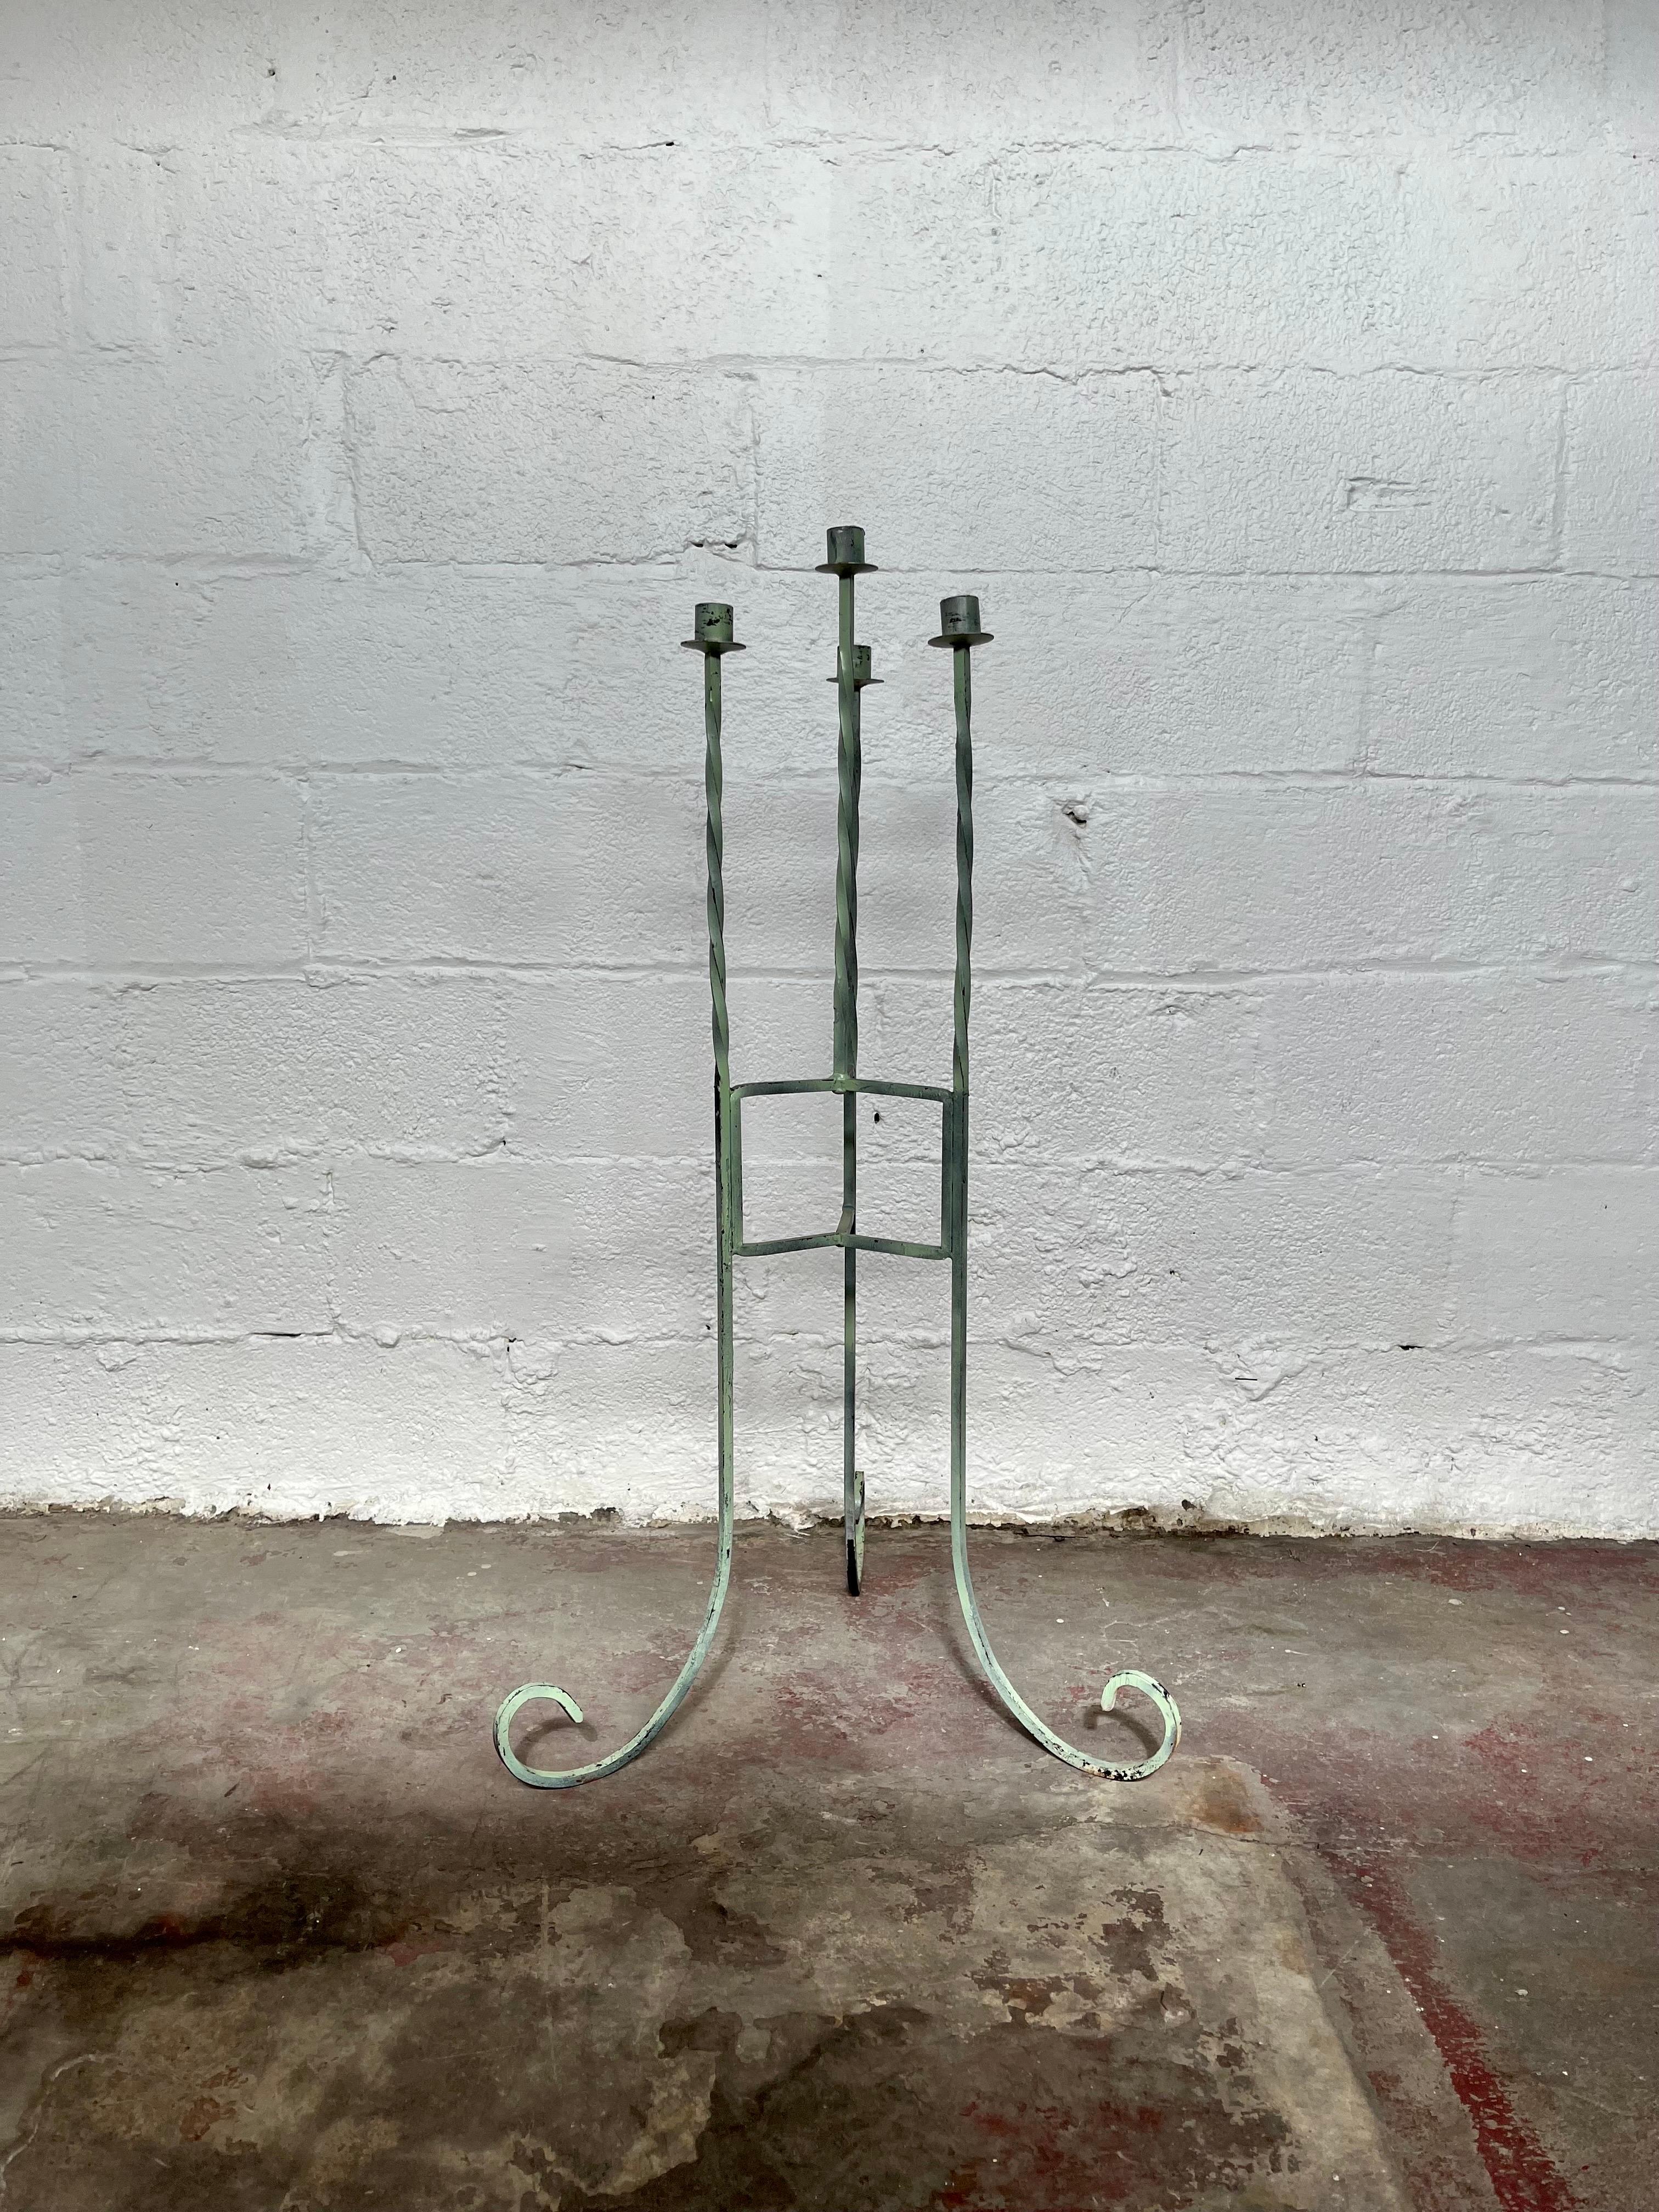 Postmodern floor candleabra with interesting twists and curves. Tall and sleek four candle holder. Painted wrought iron with upturned feet.